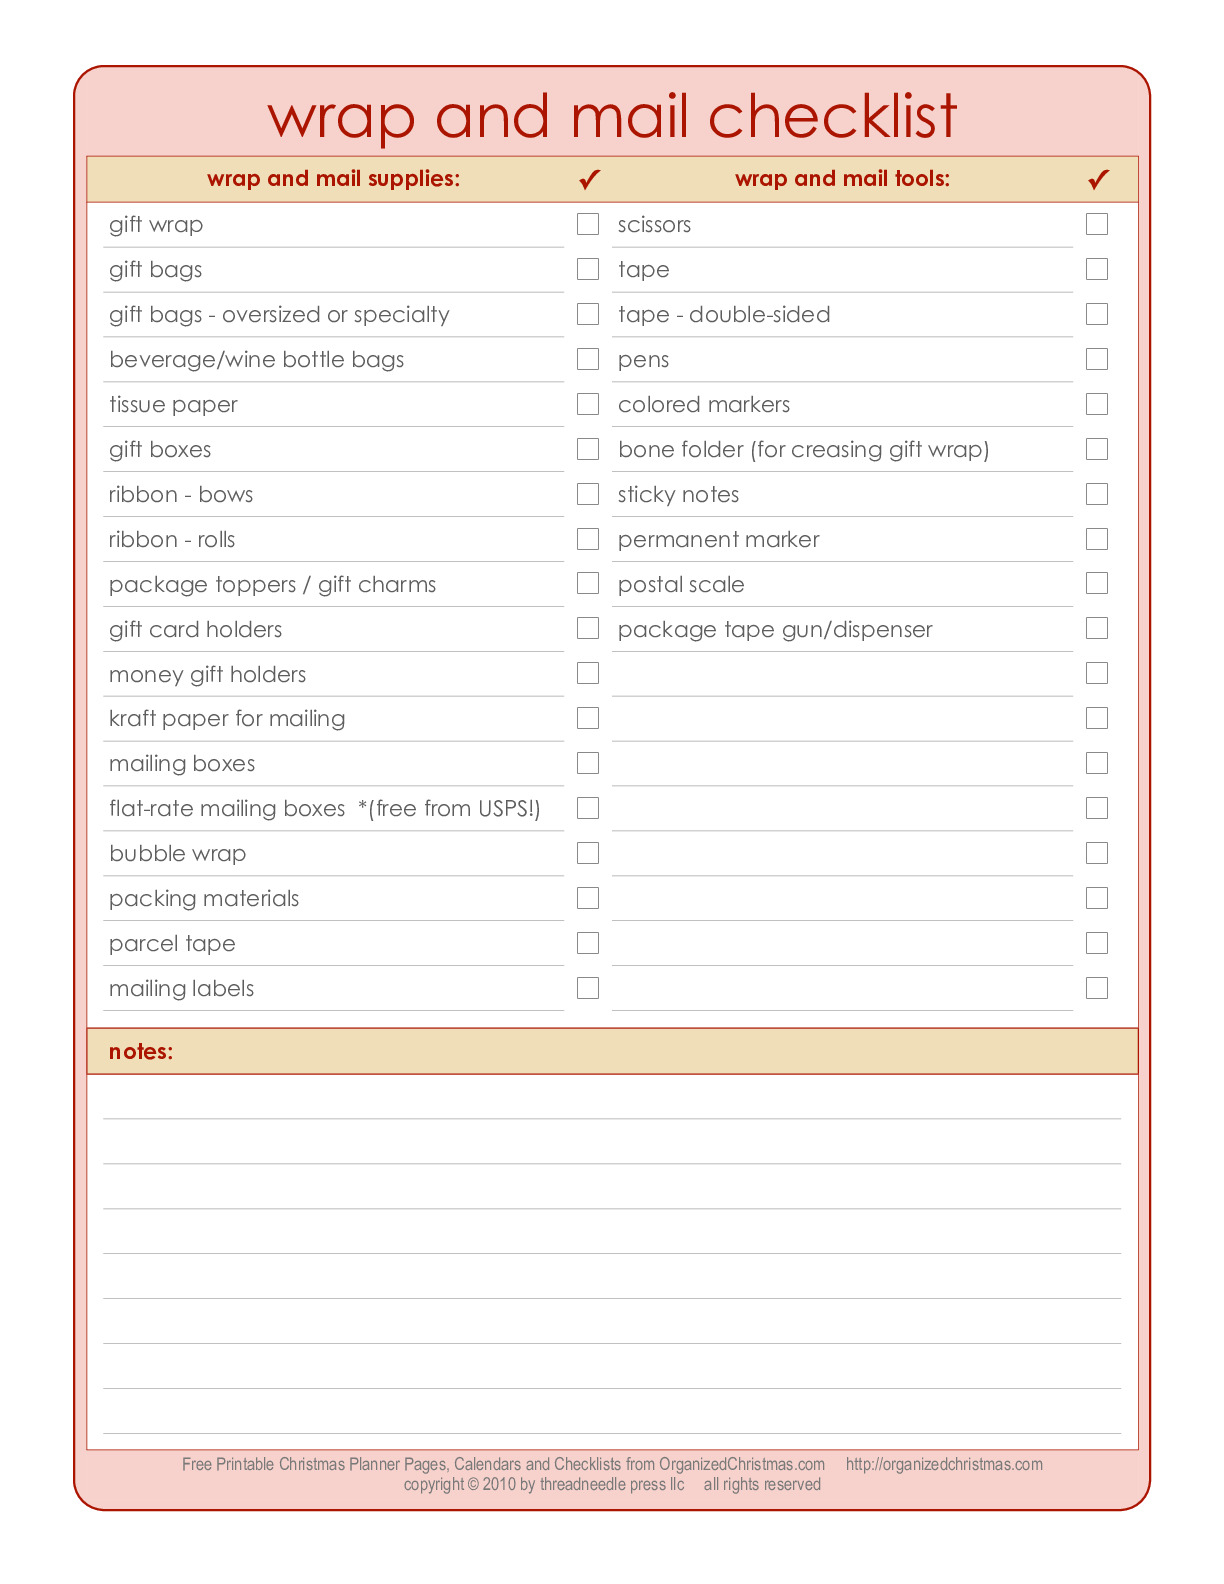 christmas_planner_gifts_wrap_mail_checklist_fillable